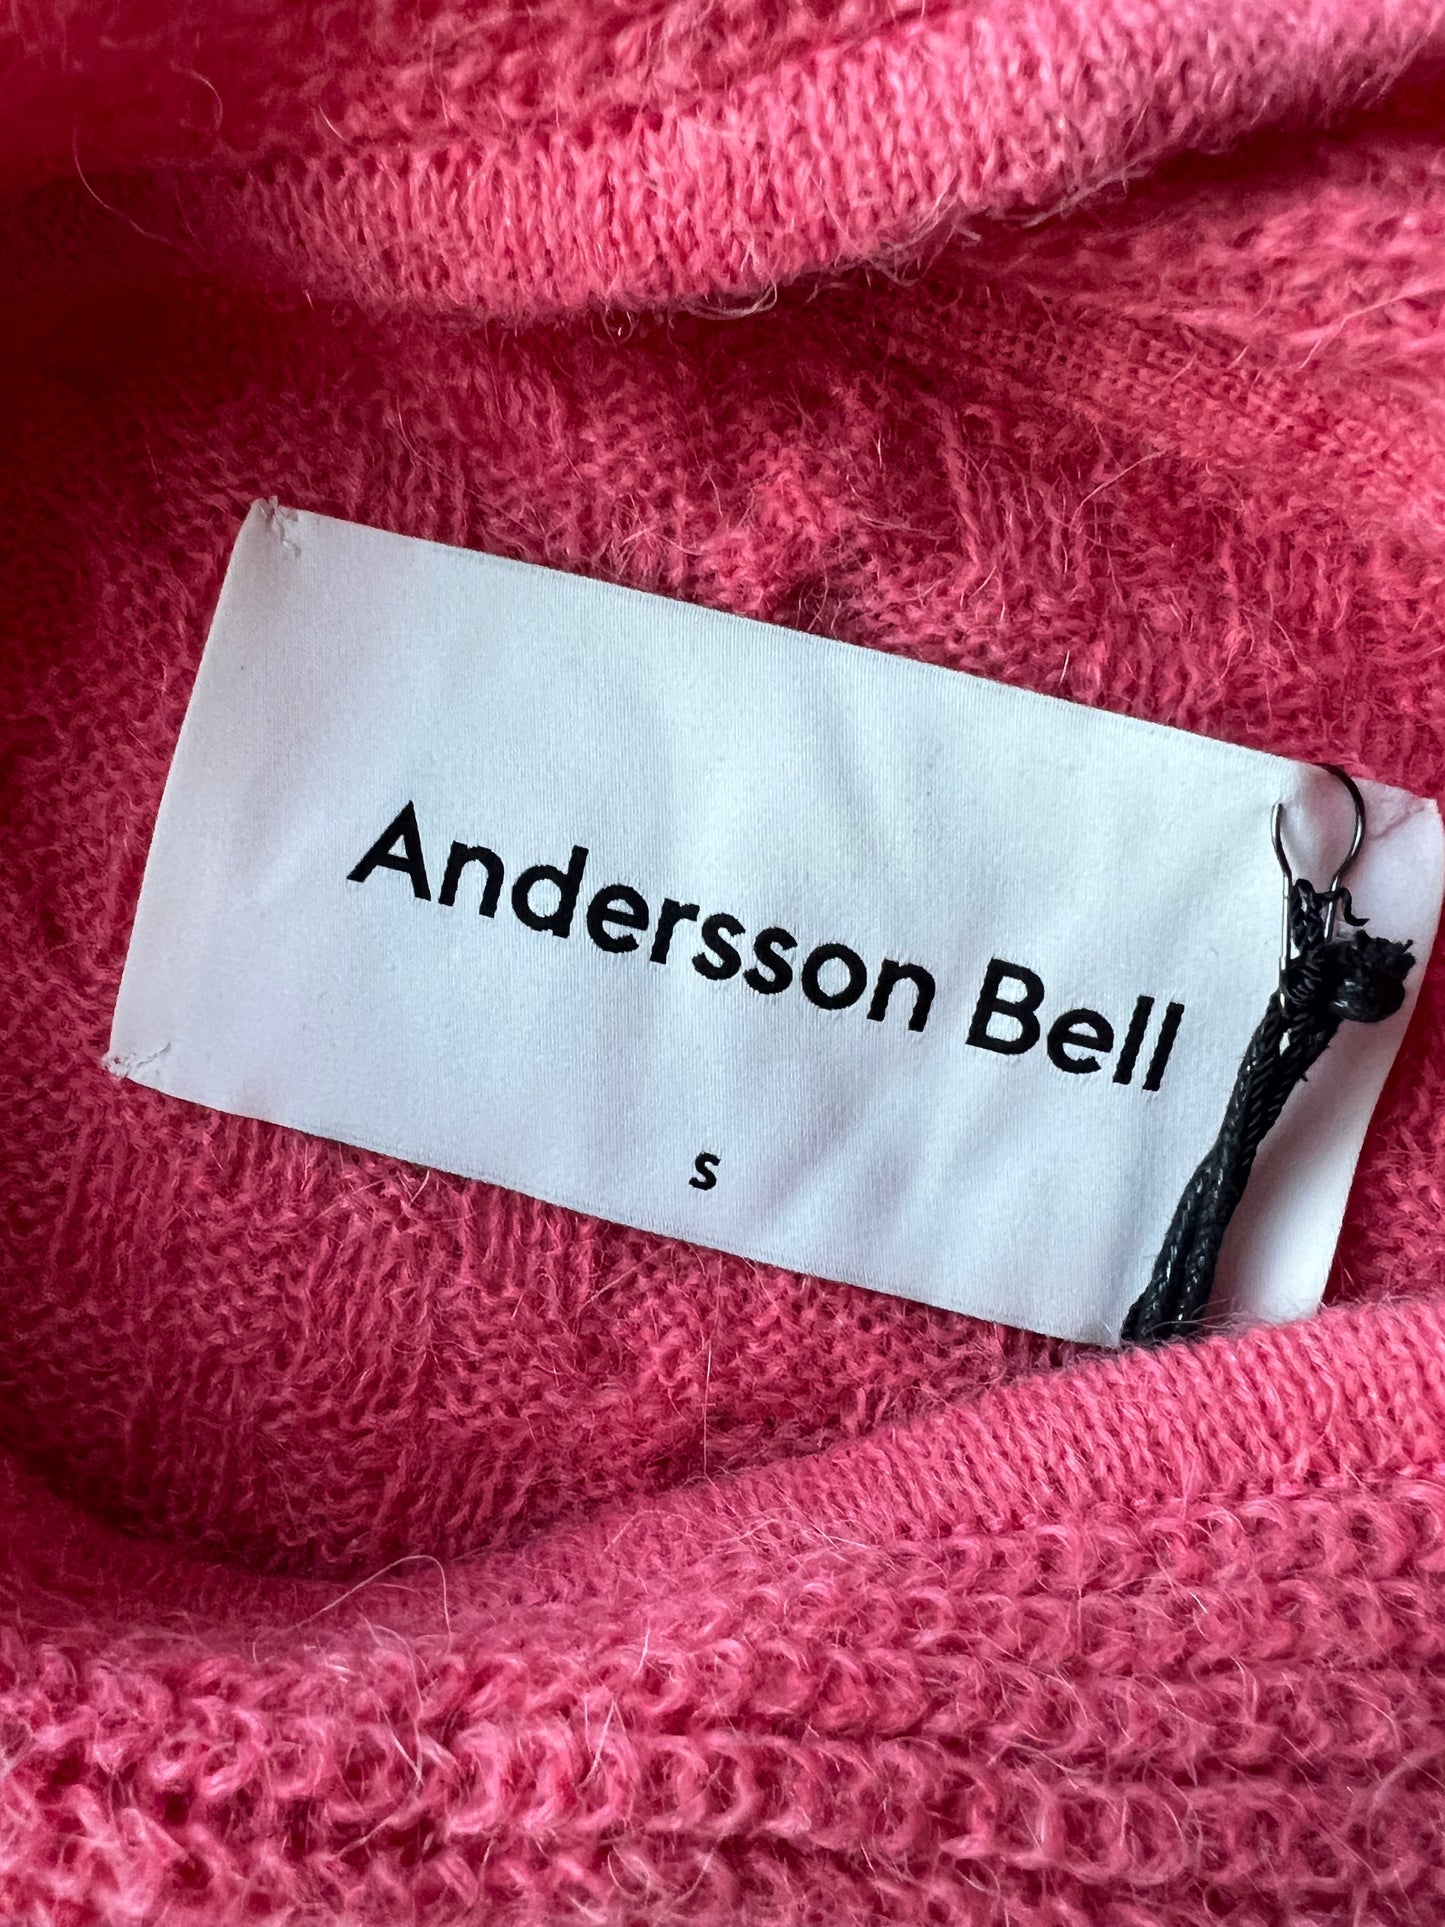 Brand New Andersson Bell Pink Rilynn Knit Sweater Size S